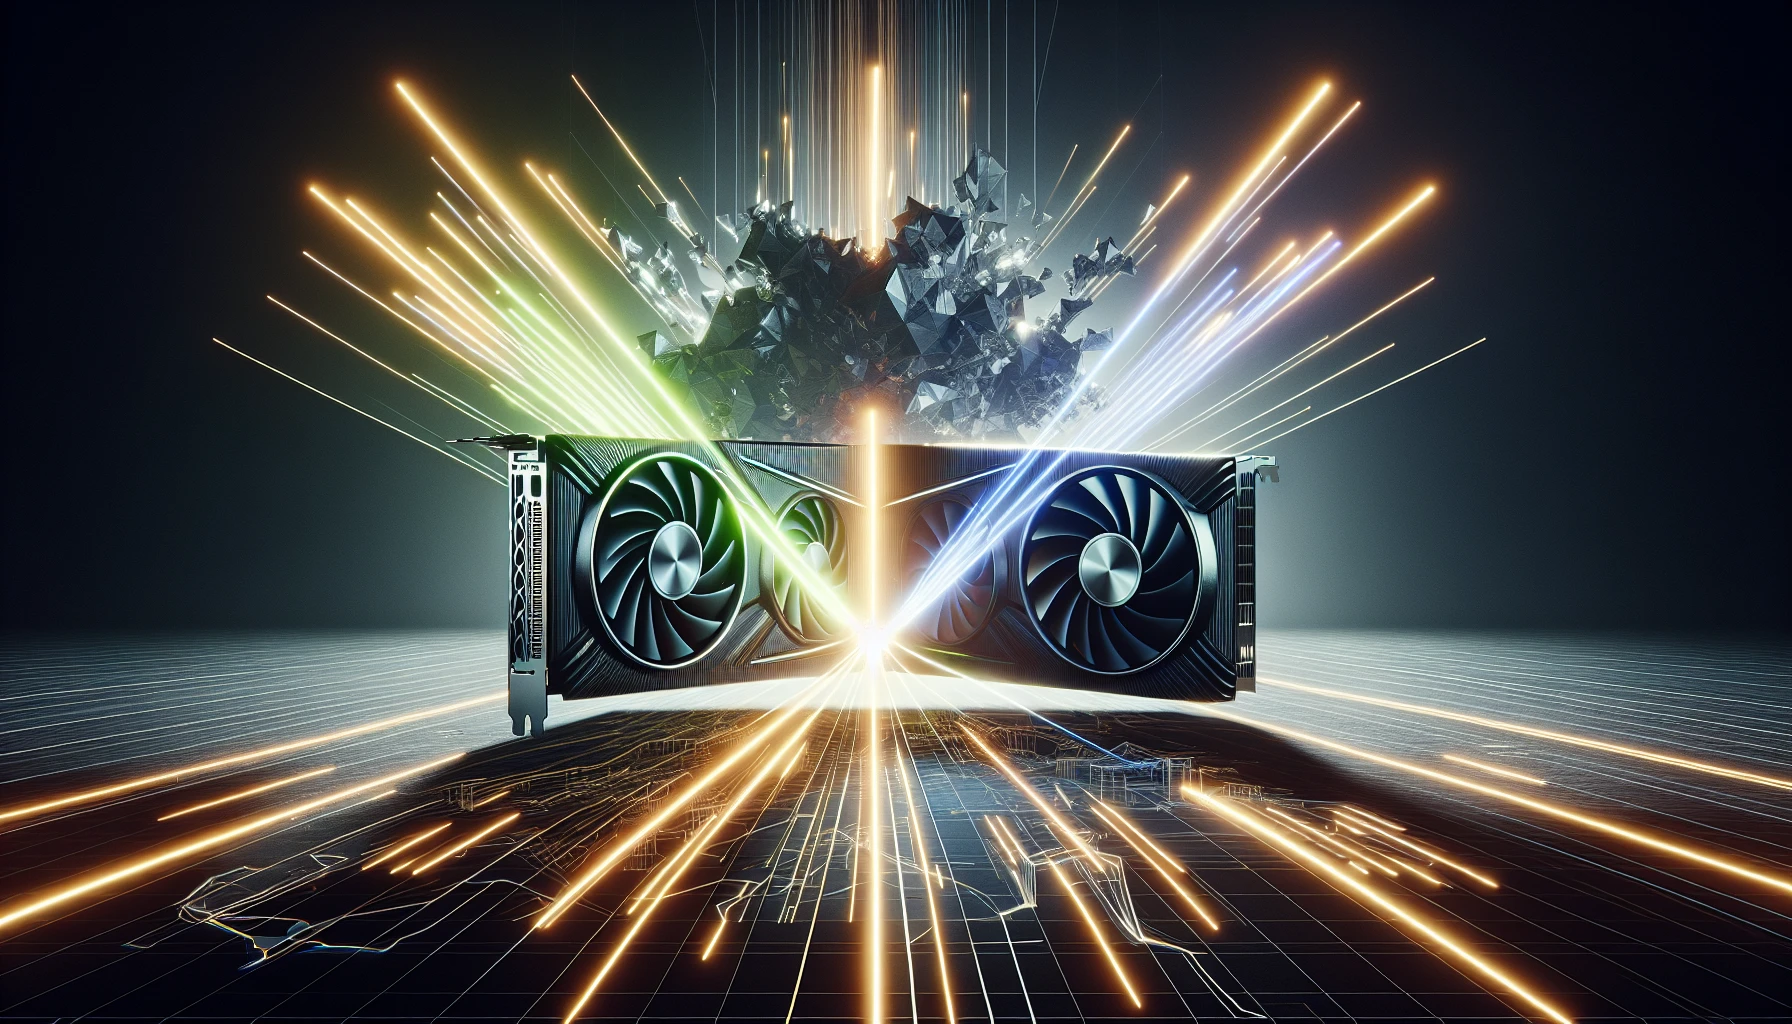 Performance of RTX 3060 and 3070 in creative workloads